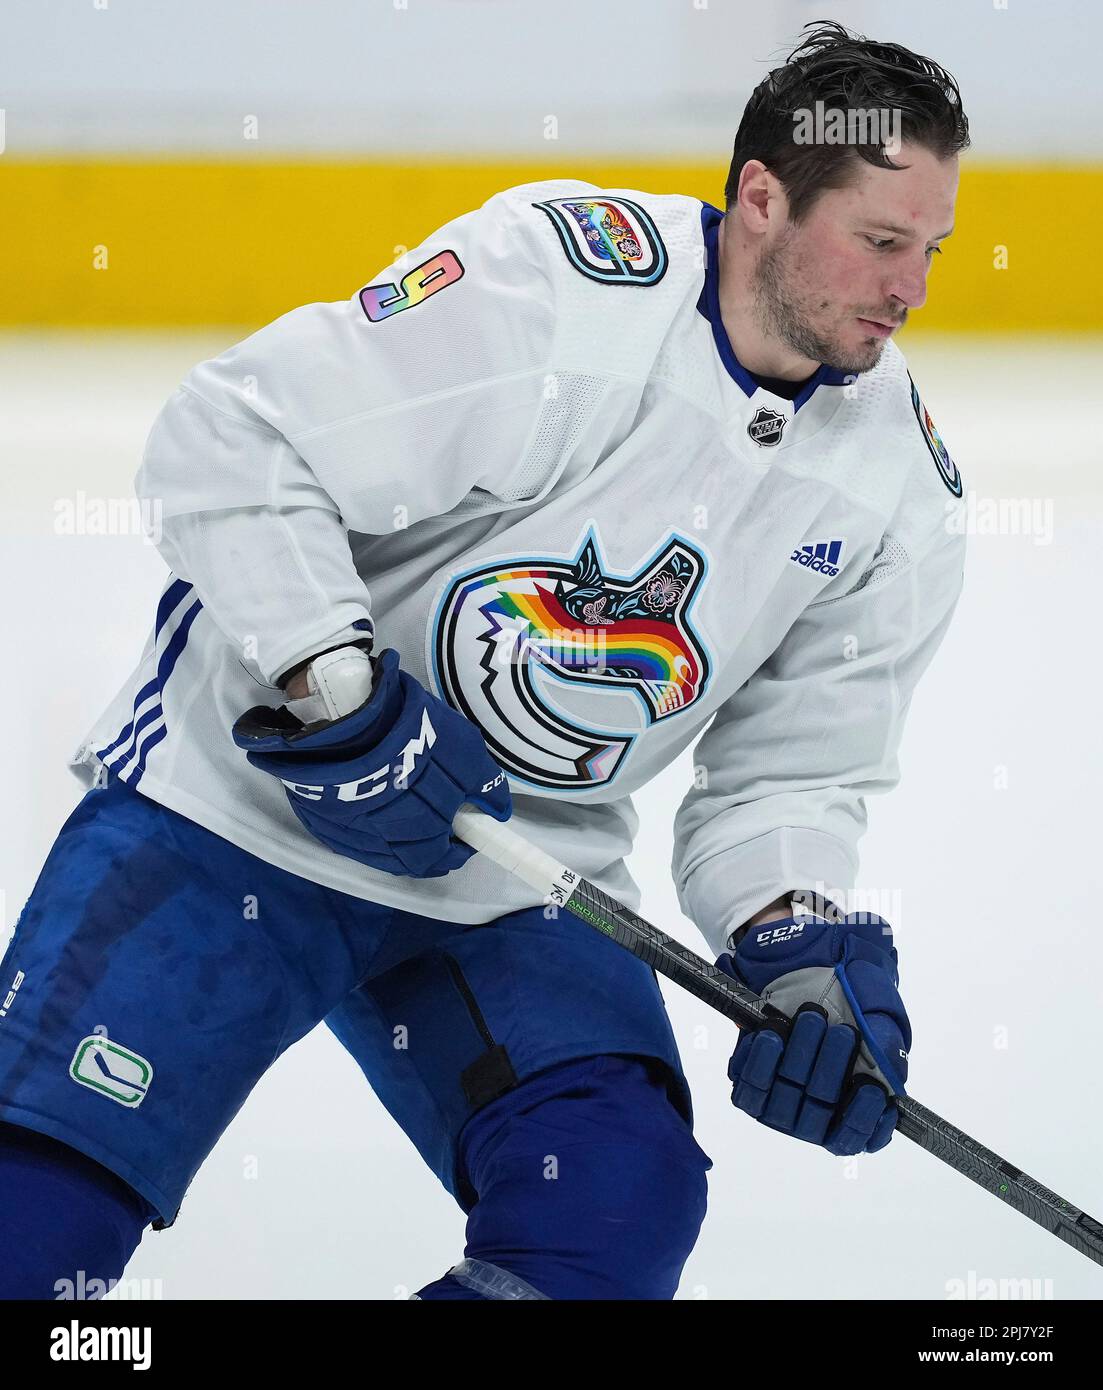 For many, Canucks' pride jerseys are a must